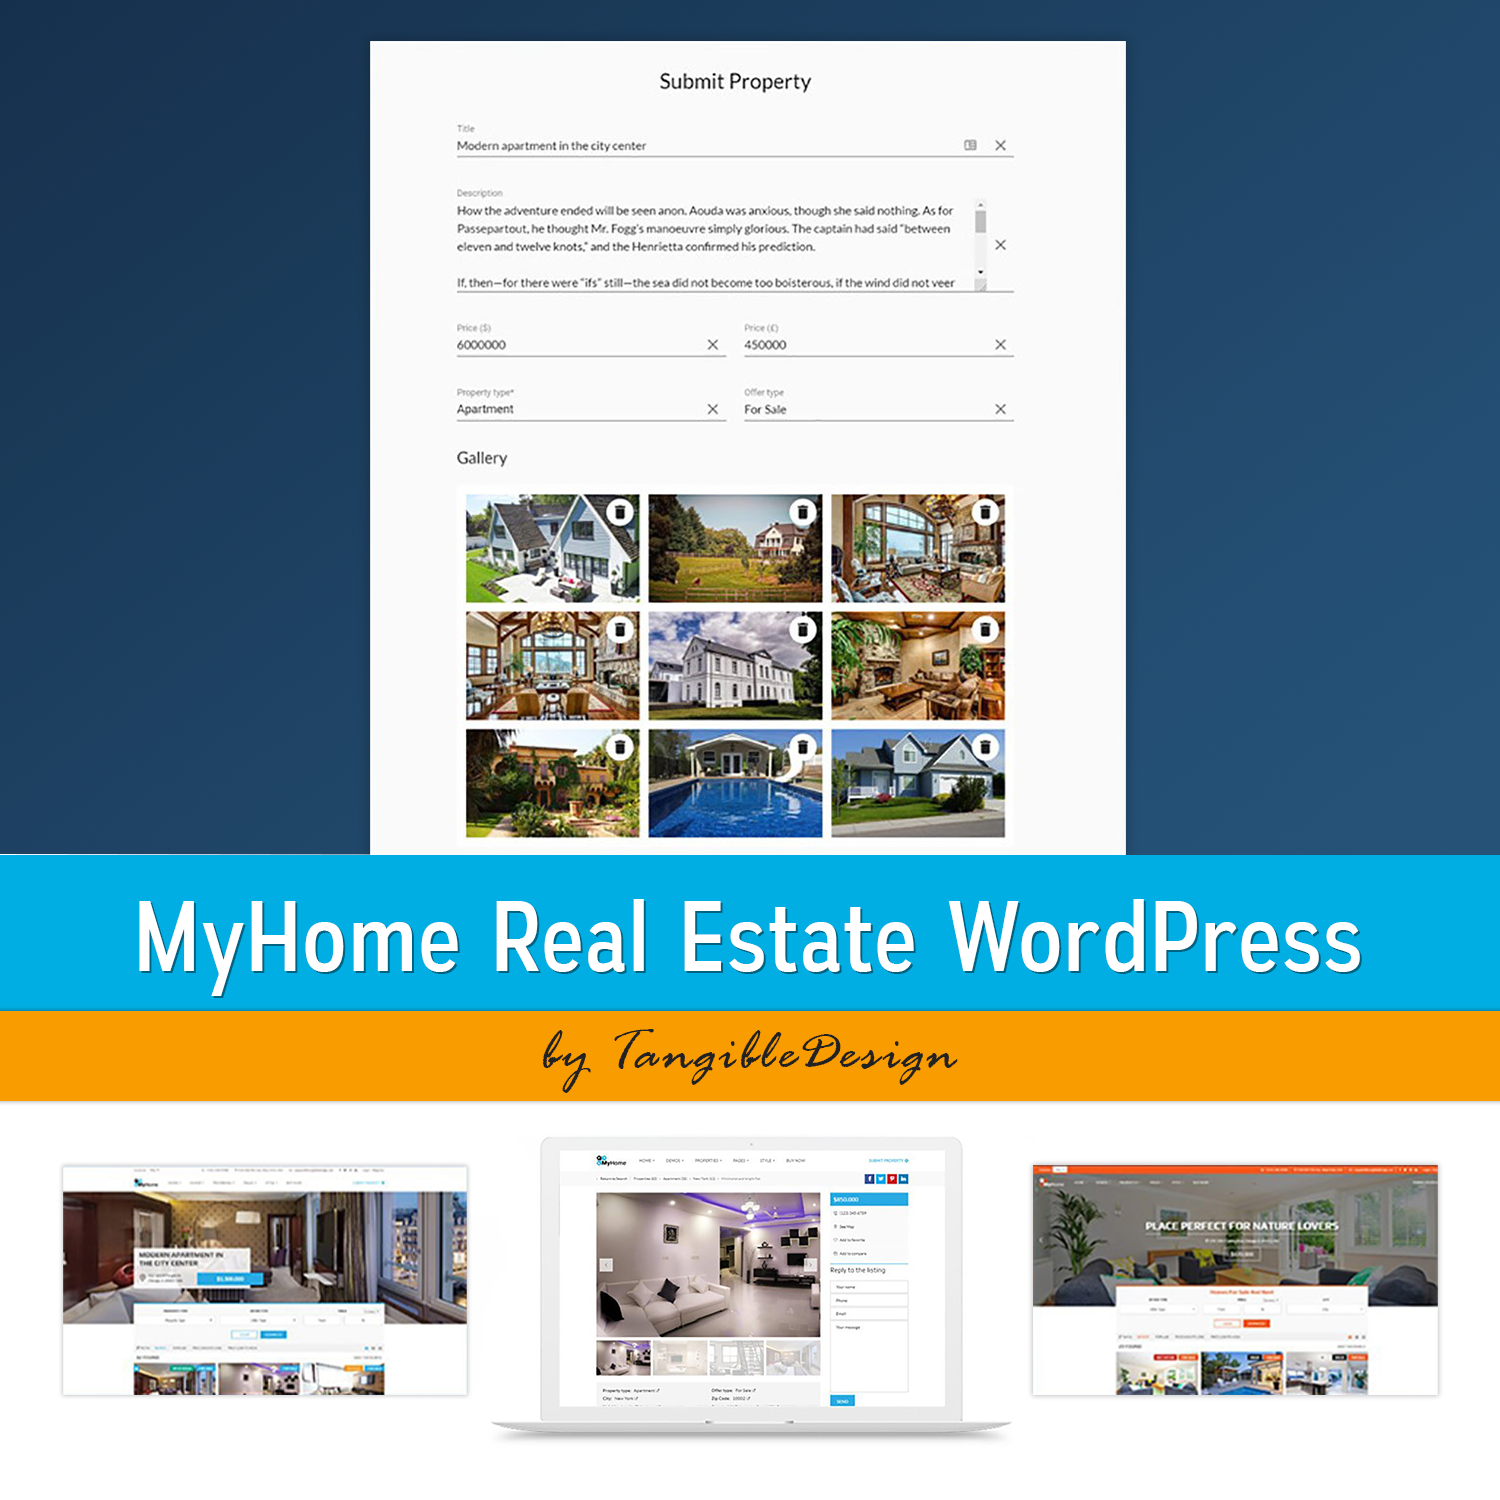 Images with myhome real estate wordpress.